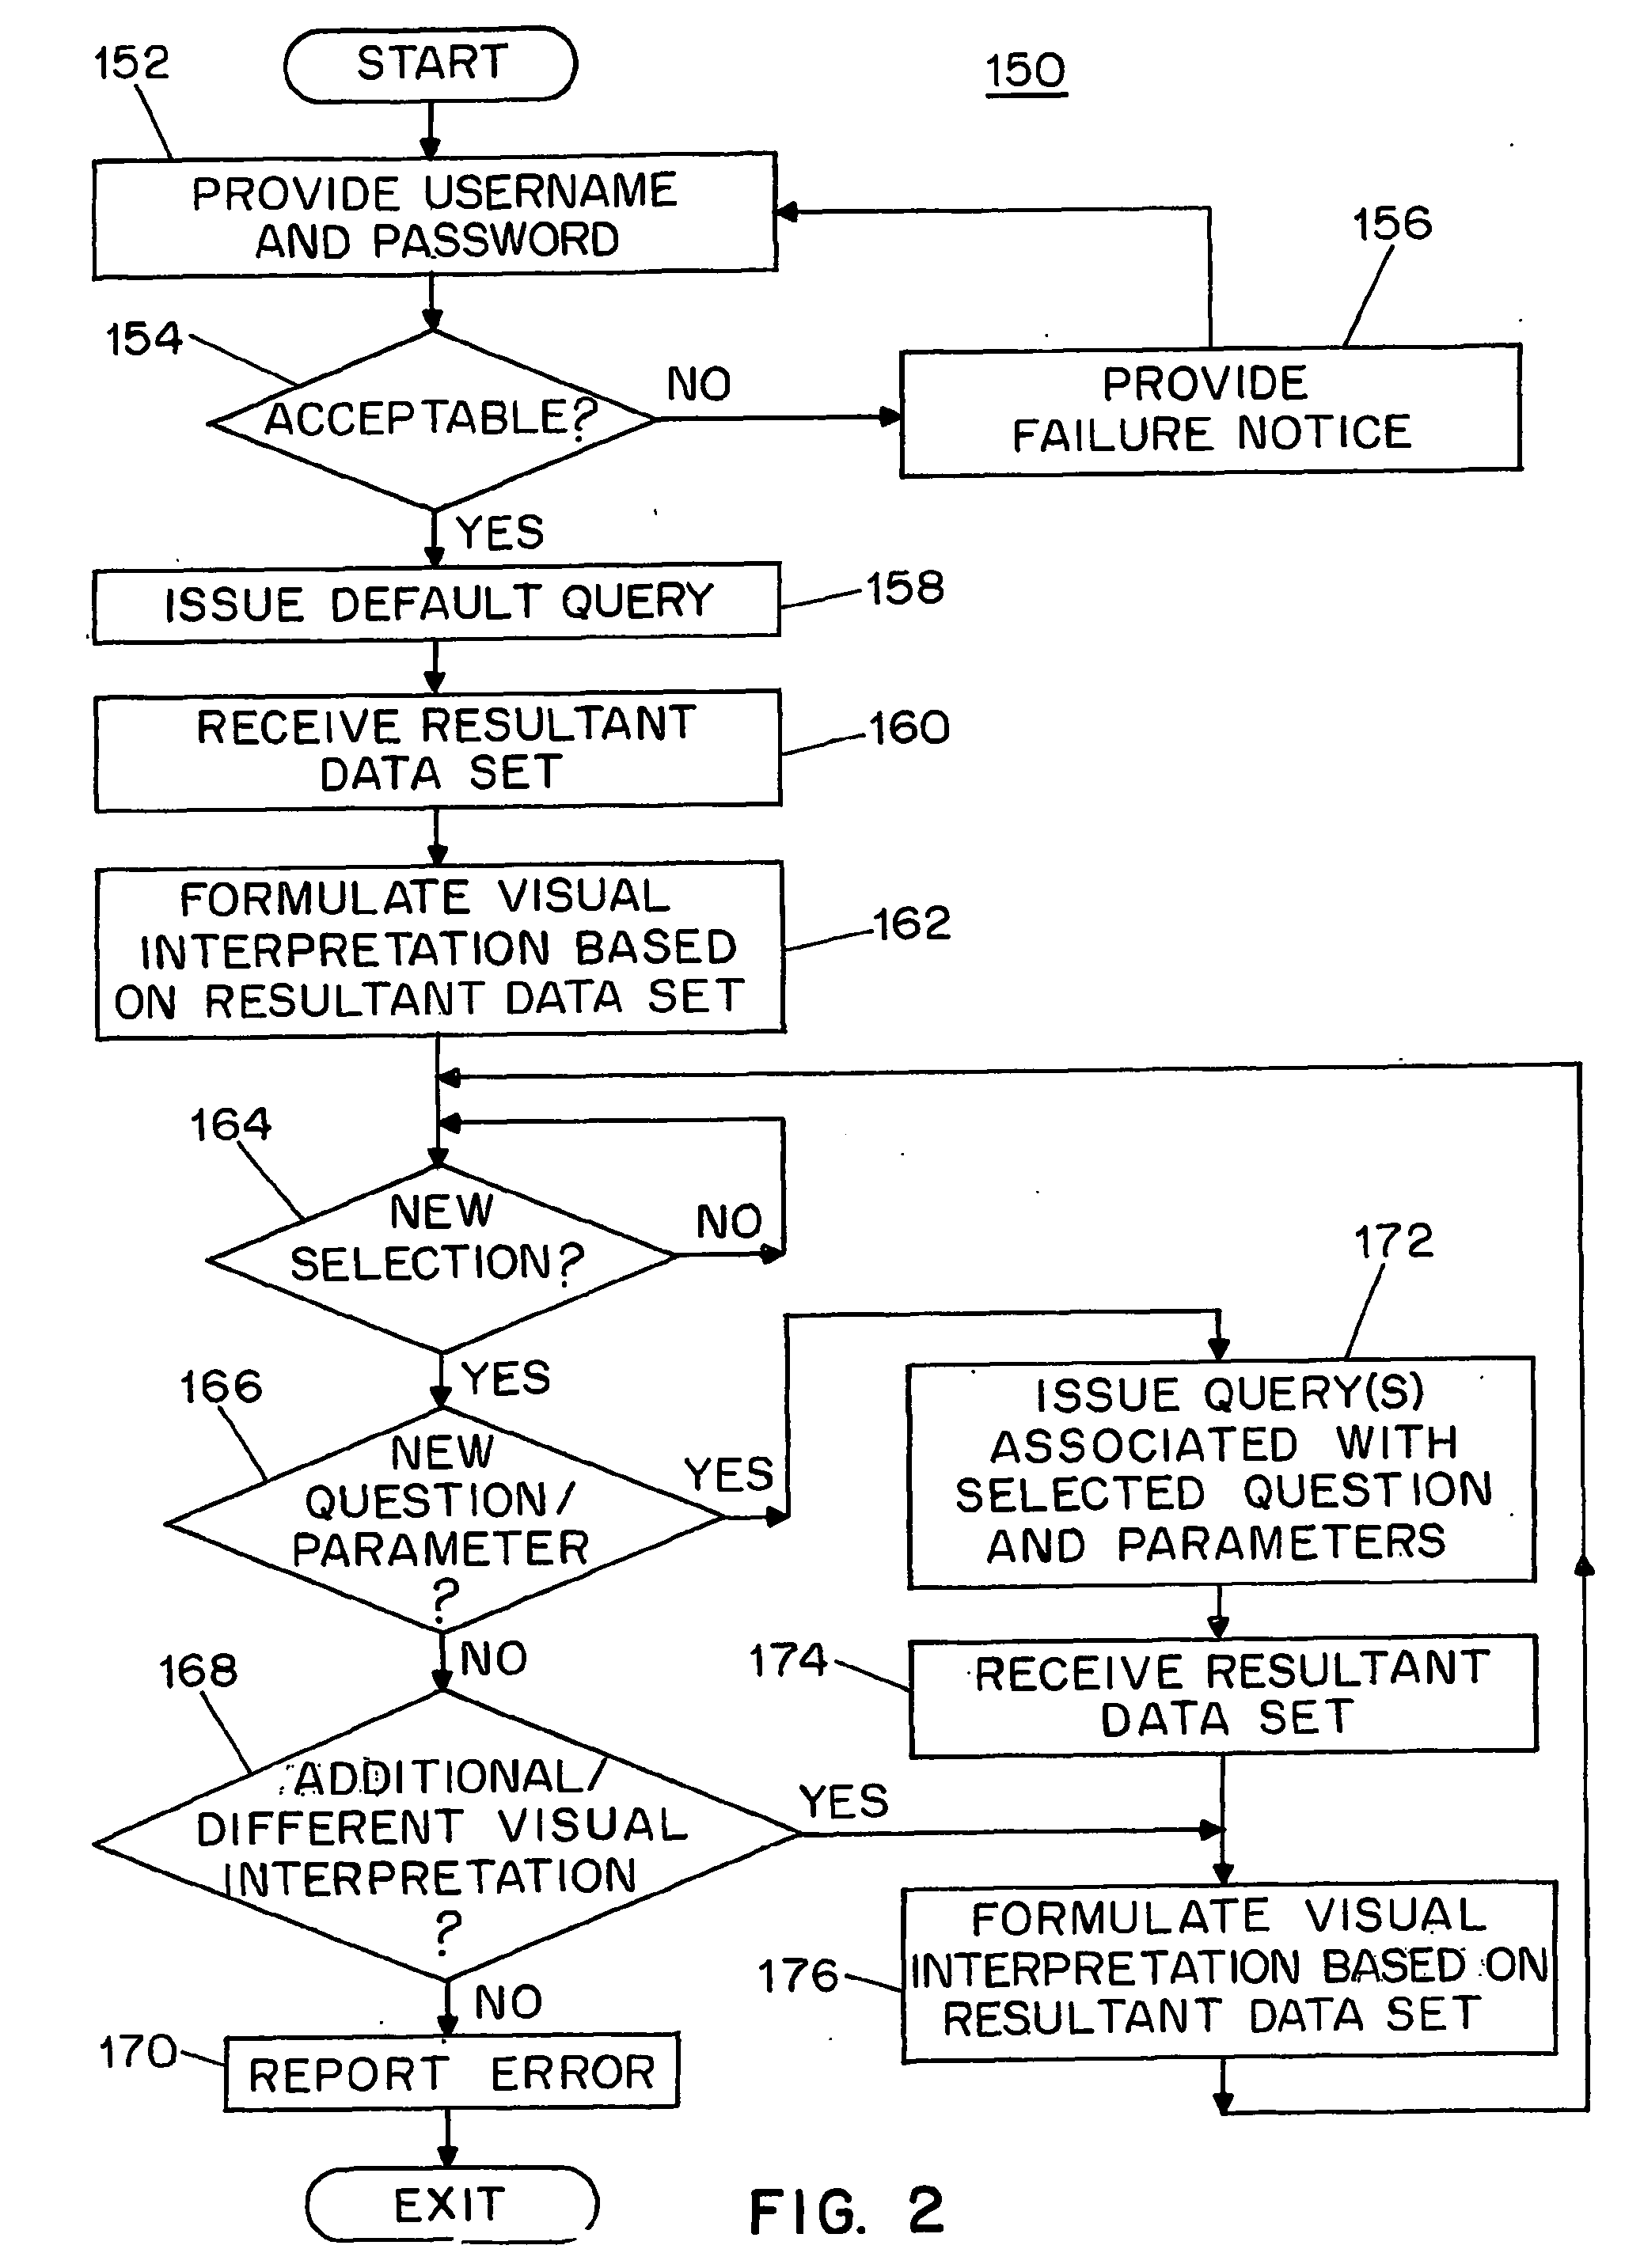 System and method for interpreting sales data through the use of natural language questions